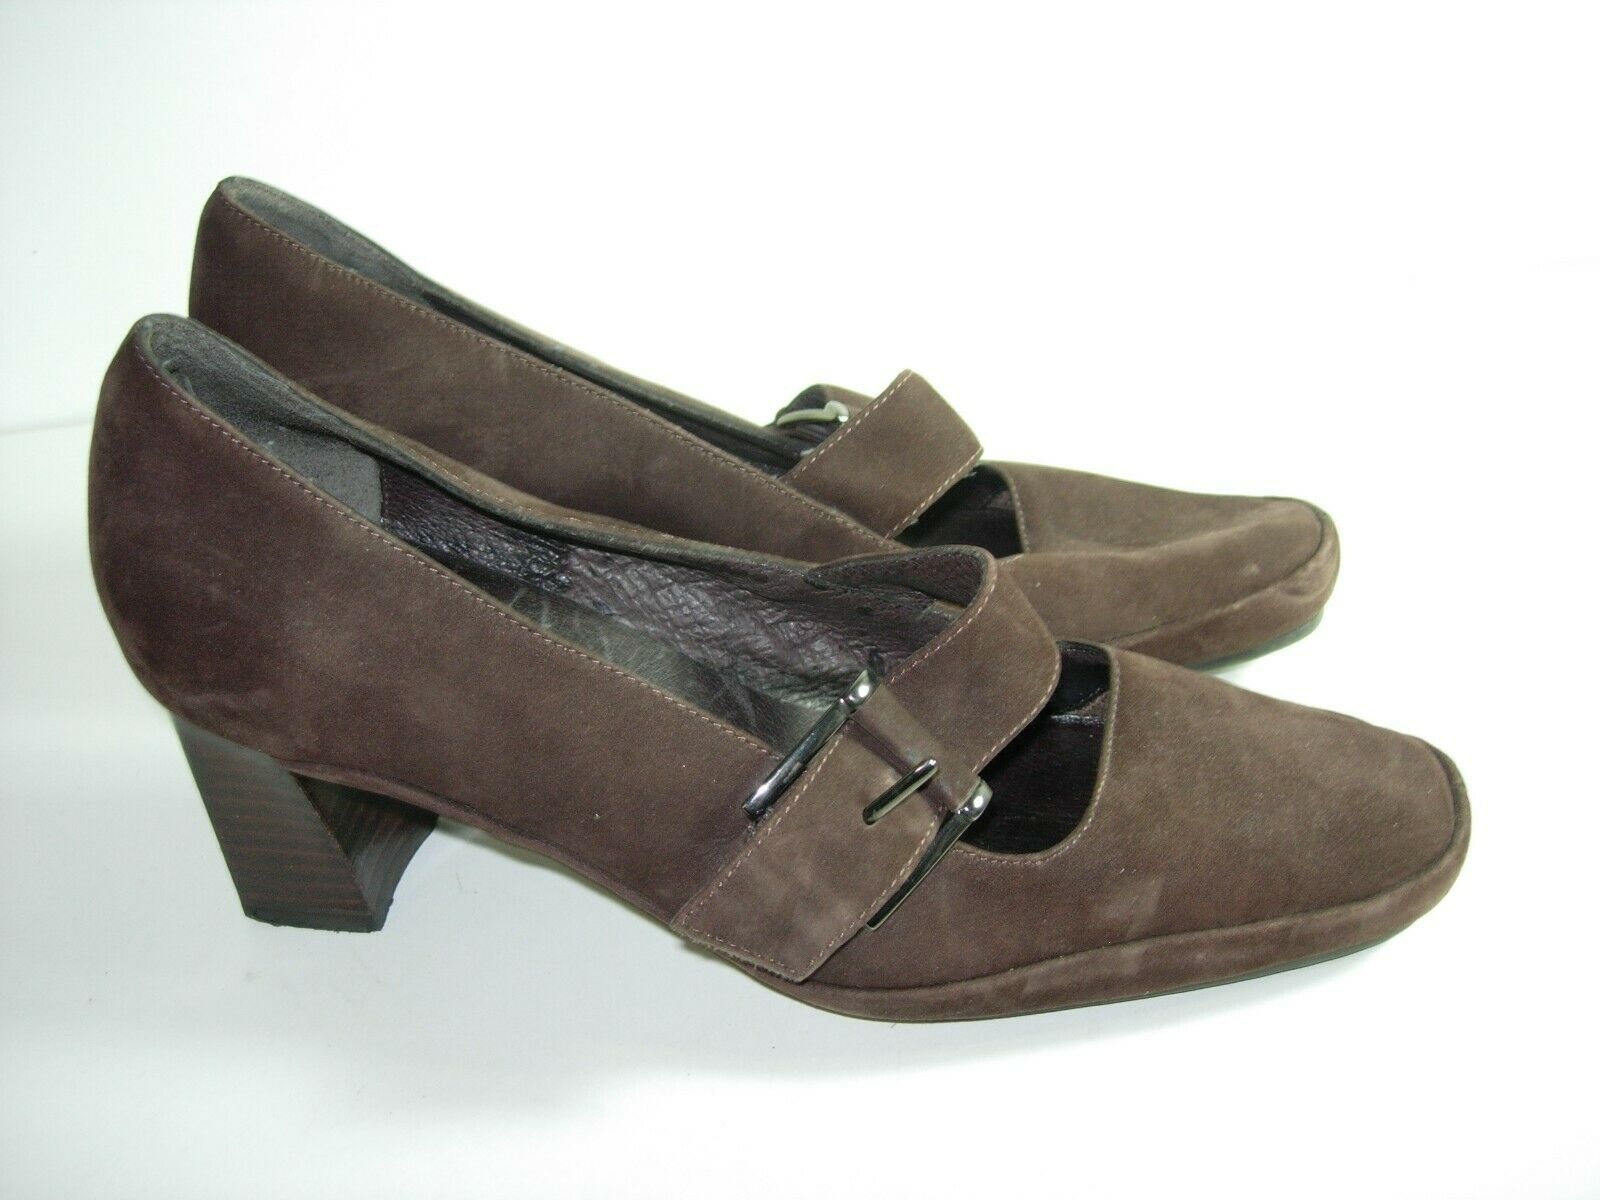 WOMENS BROWN SUEDE AEROSOLES MARY JANES PUMPS CAREER HIGH HEELS SHOES SIZE 9 M